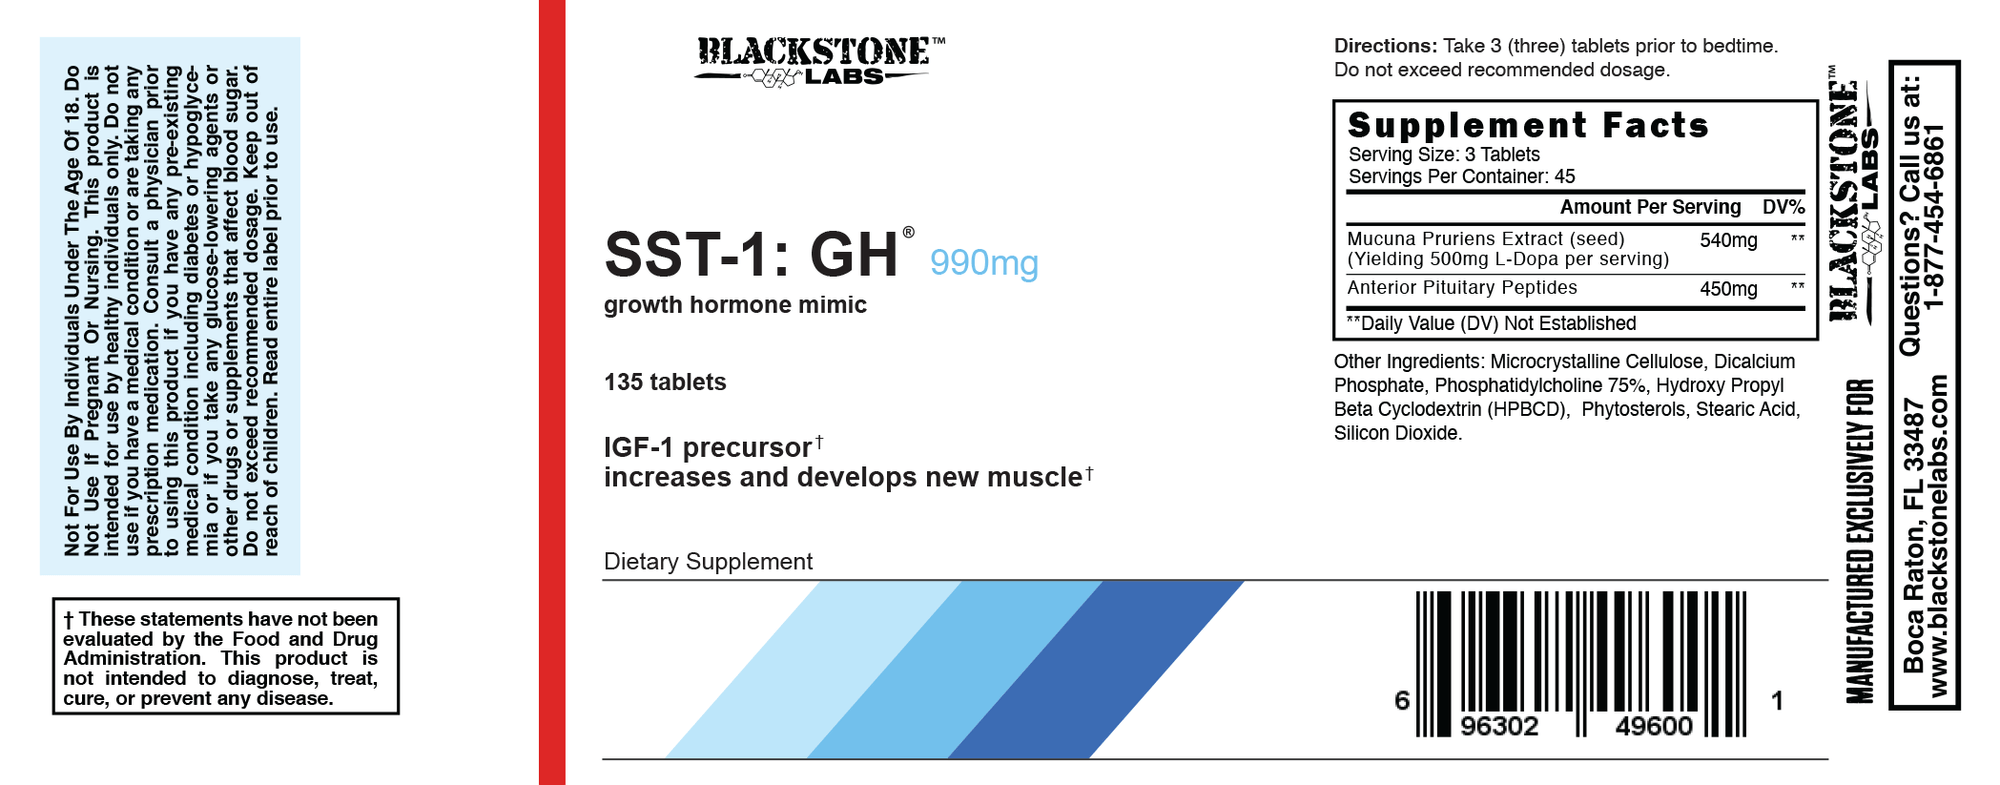 Blackstone Labs SST-1 : GH 990mg facts